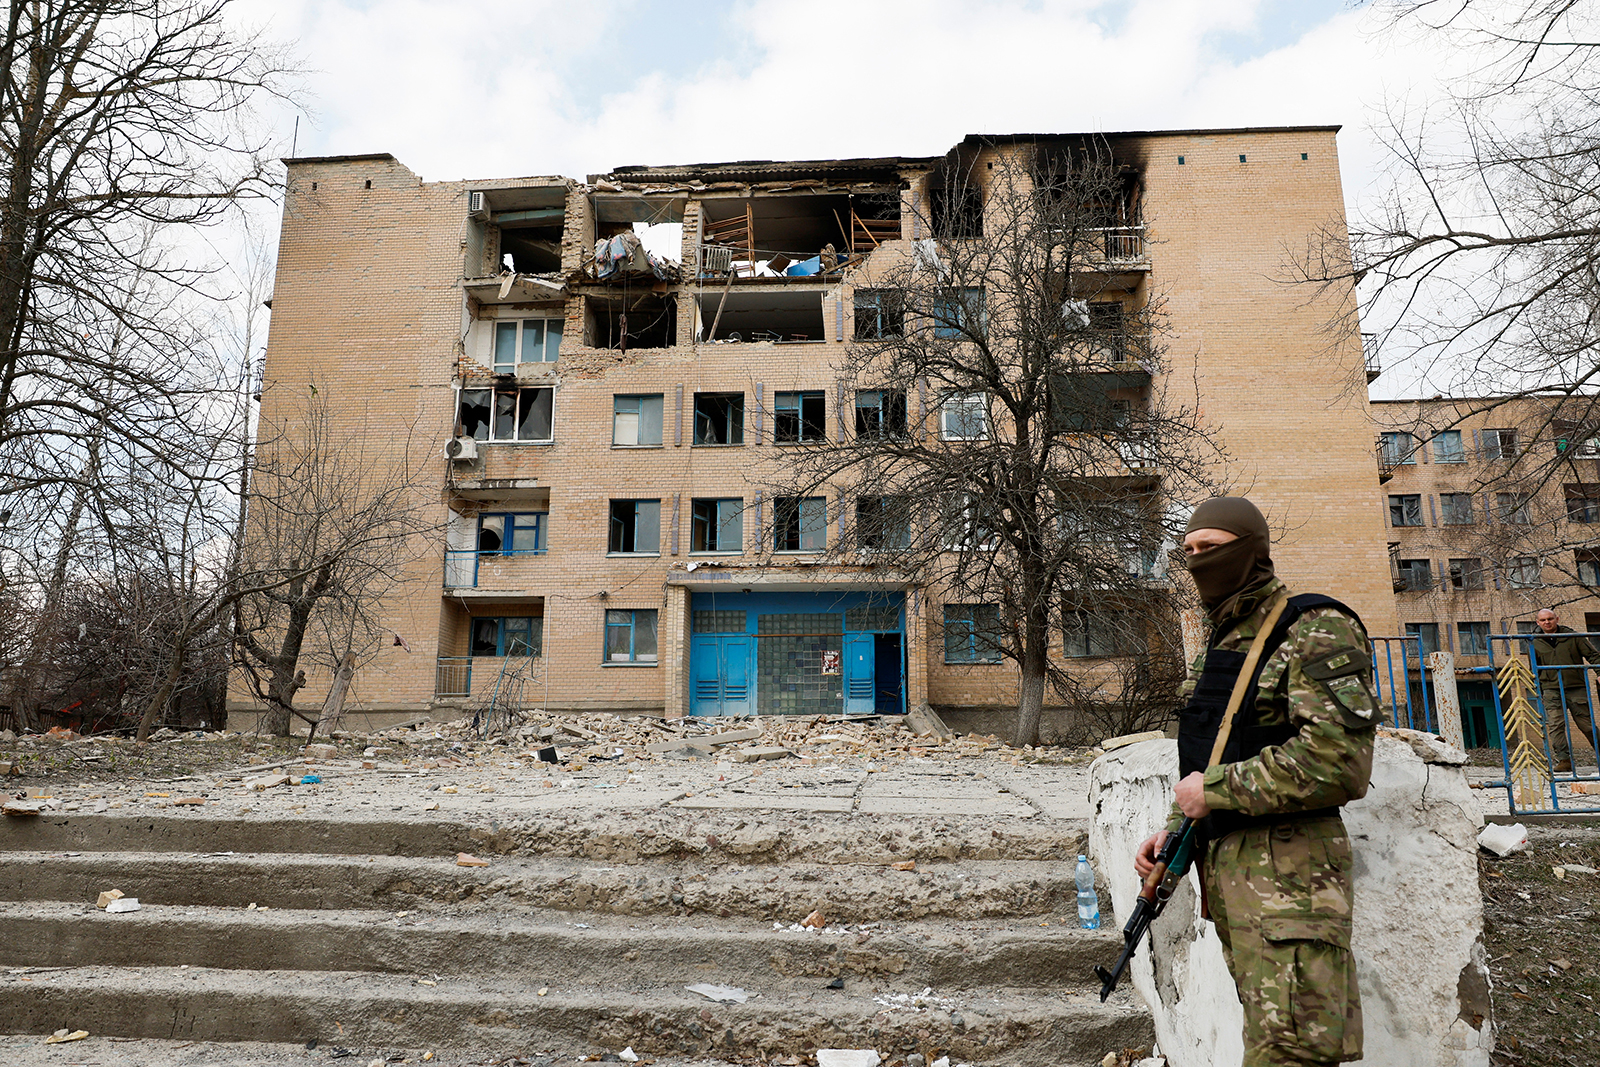 A security personnel stands guard at a site of a building heavily damaged by Russian drone strikes in Kyiv region, on March 22.